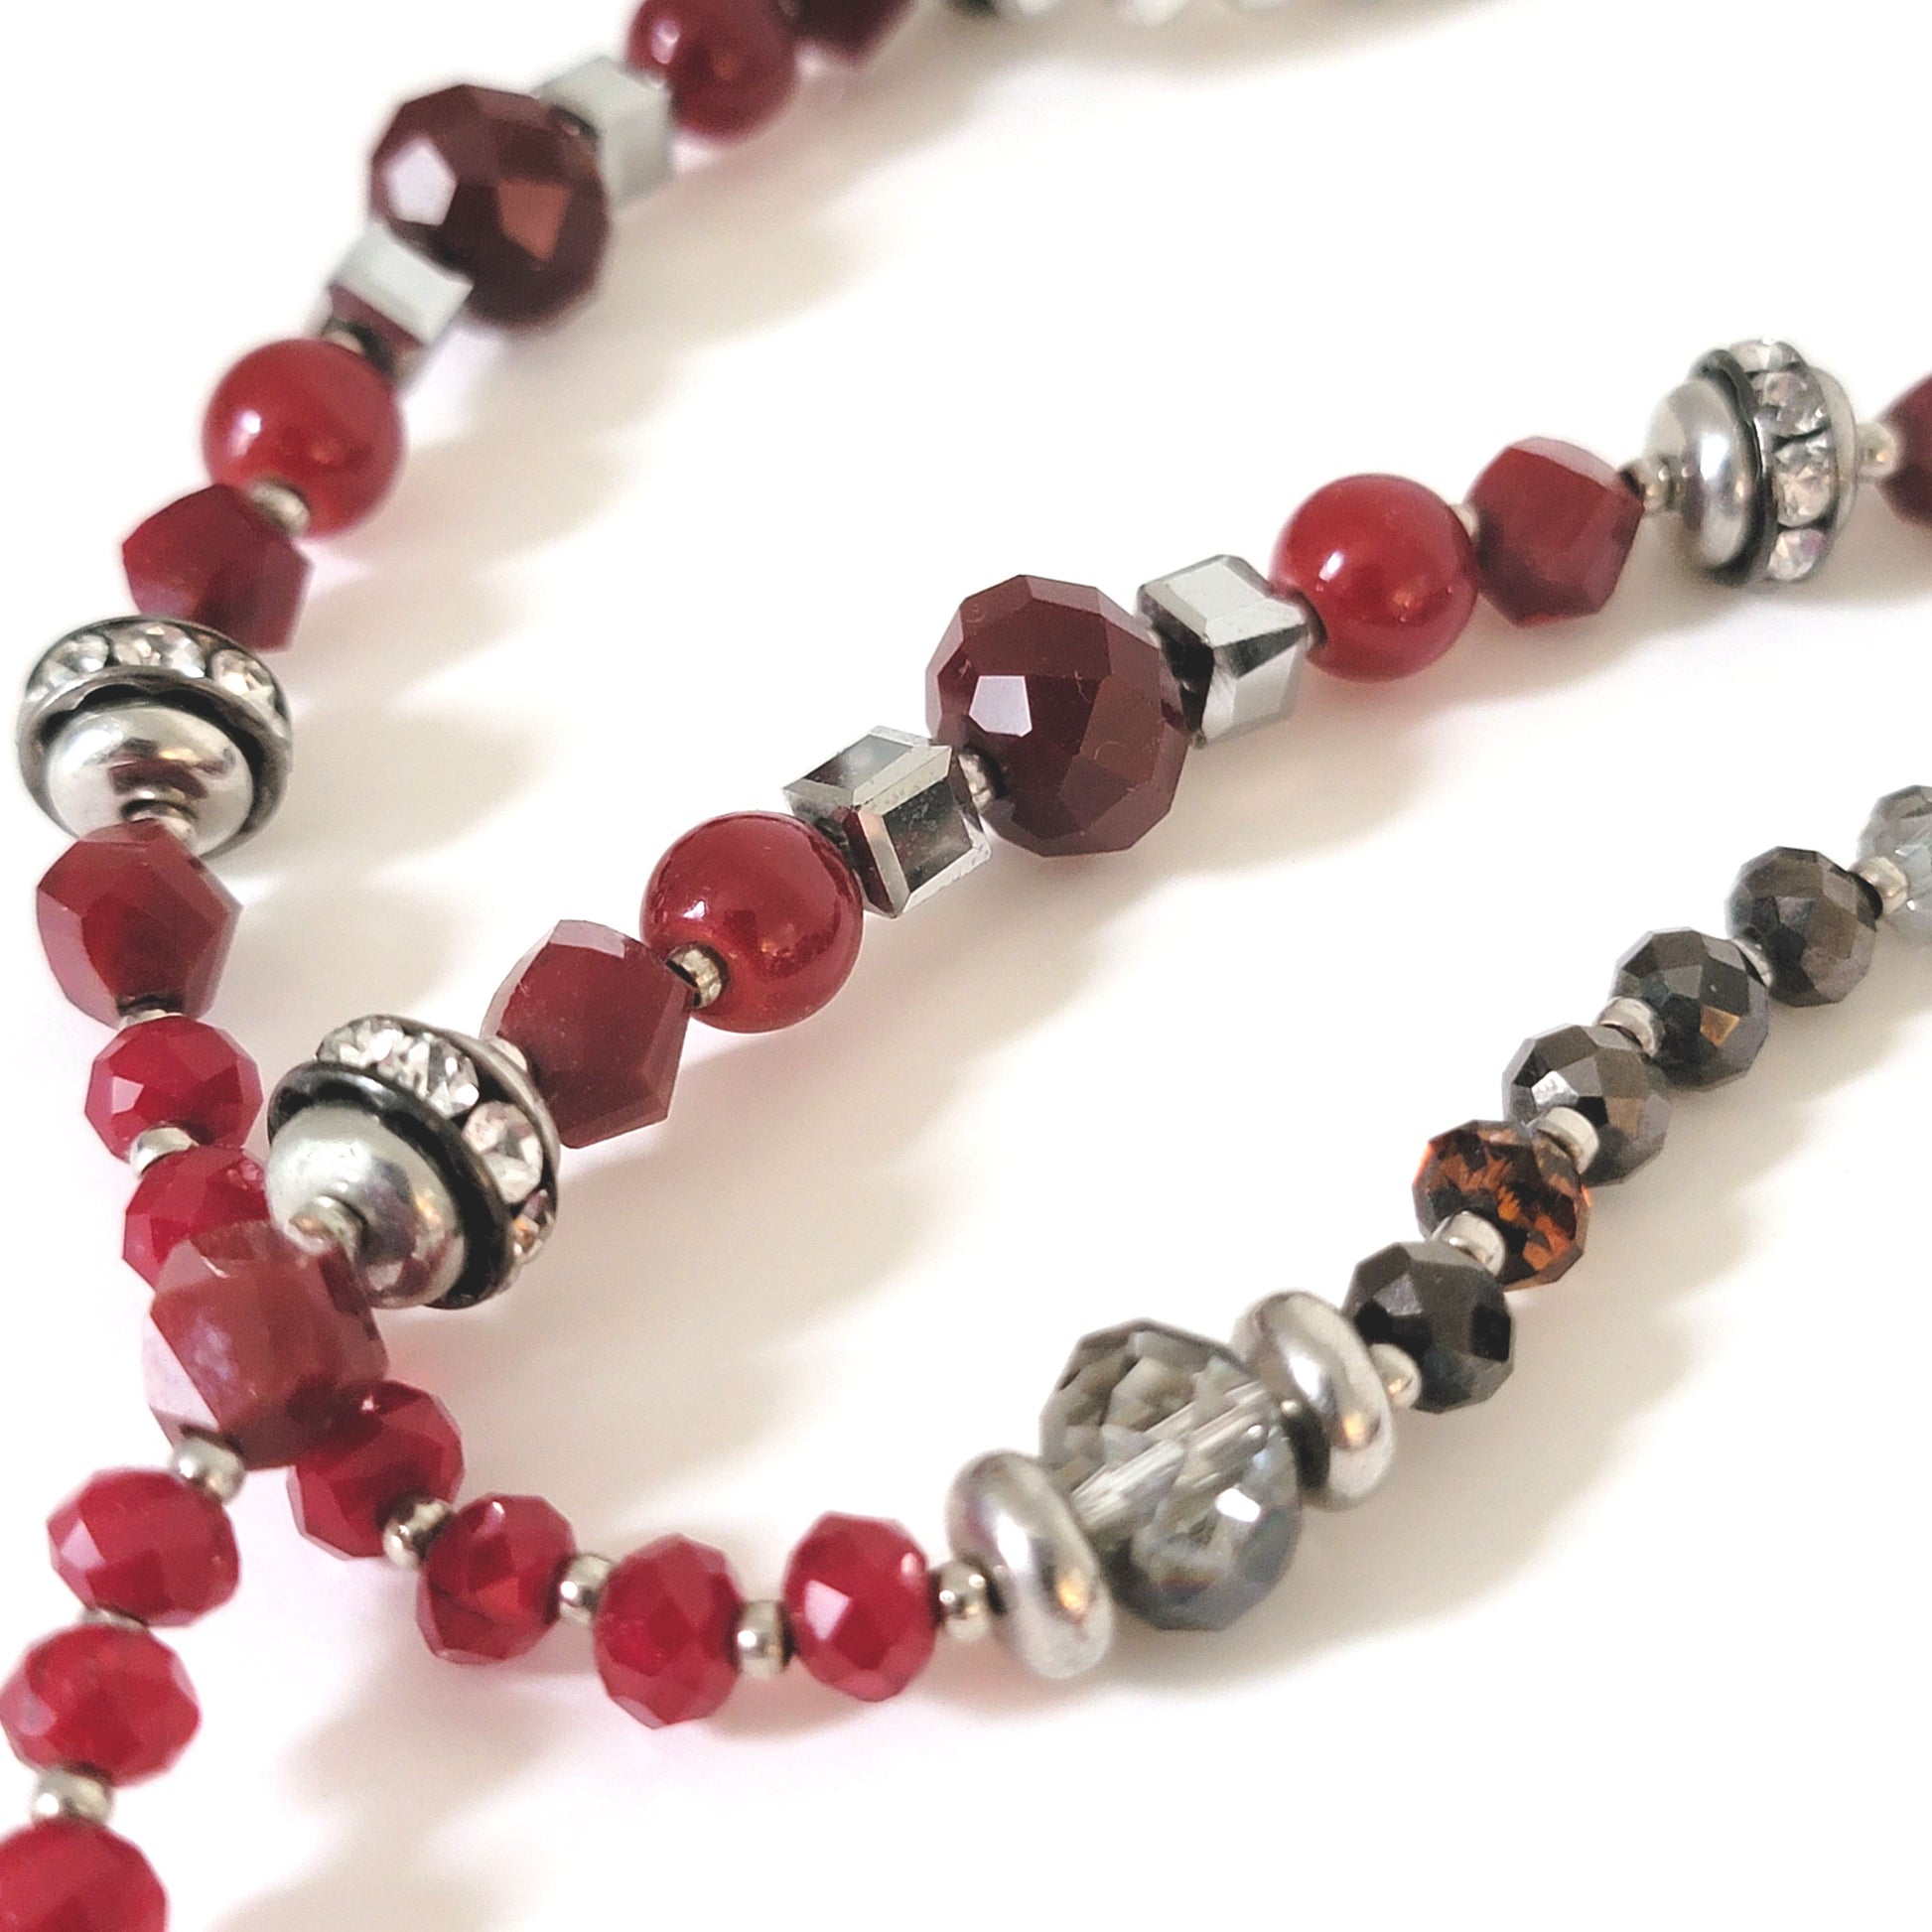 Red and silver faceted glass beads.